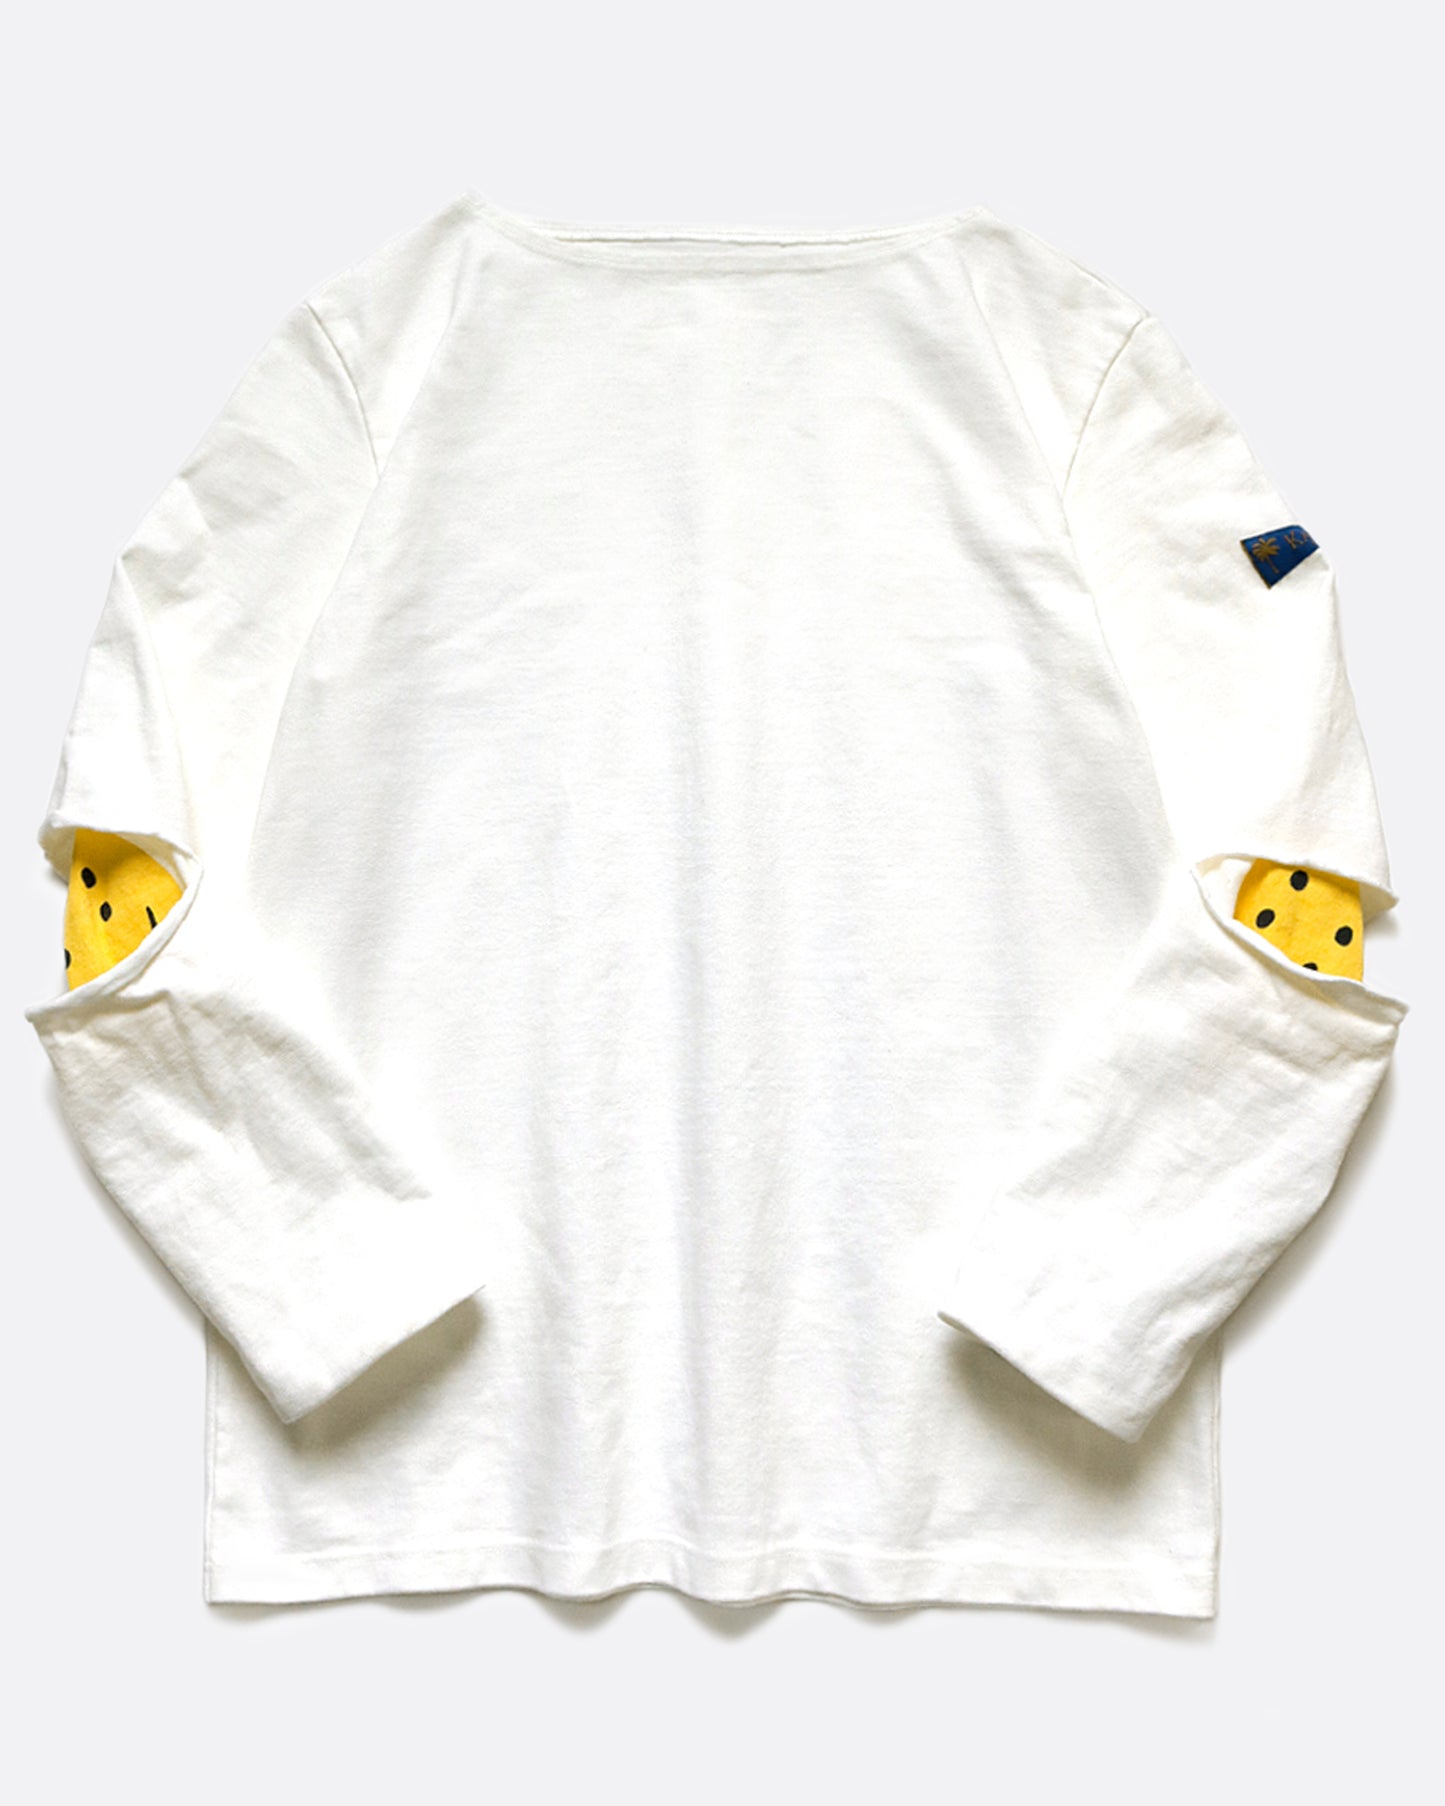 A dense jersey, long sleeve shirt with hidden smileys peeking out at the elbows.